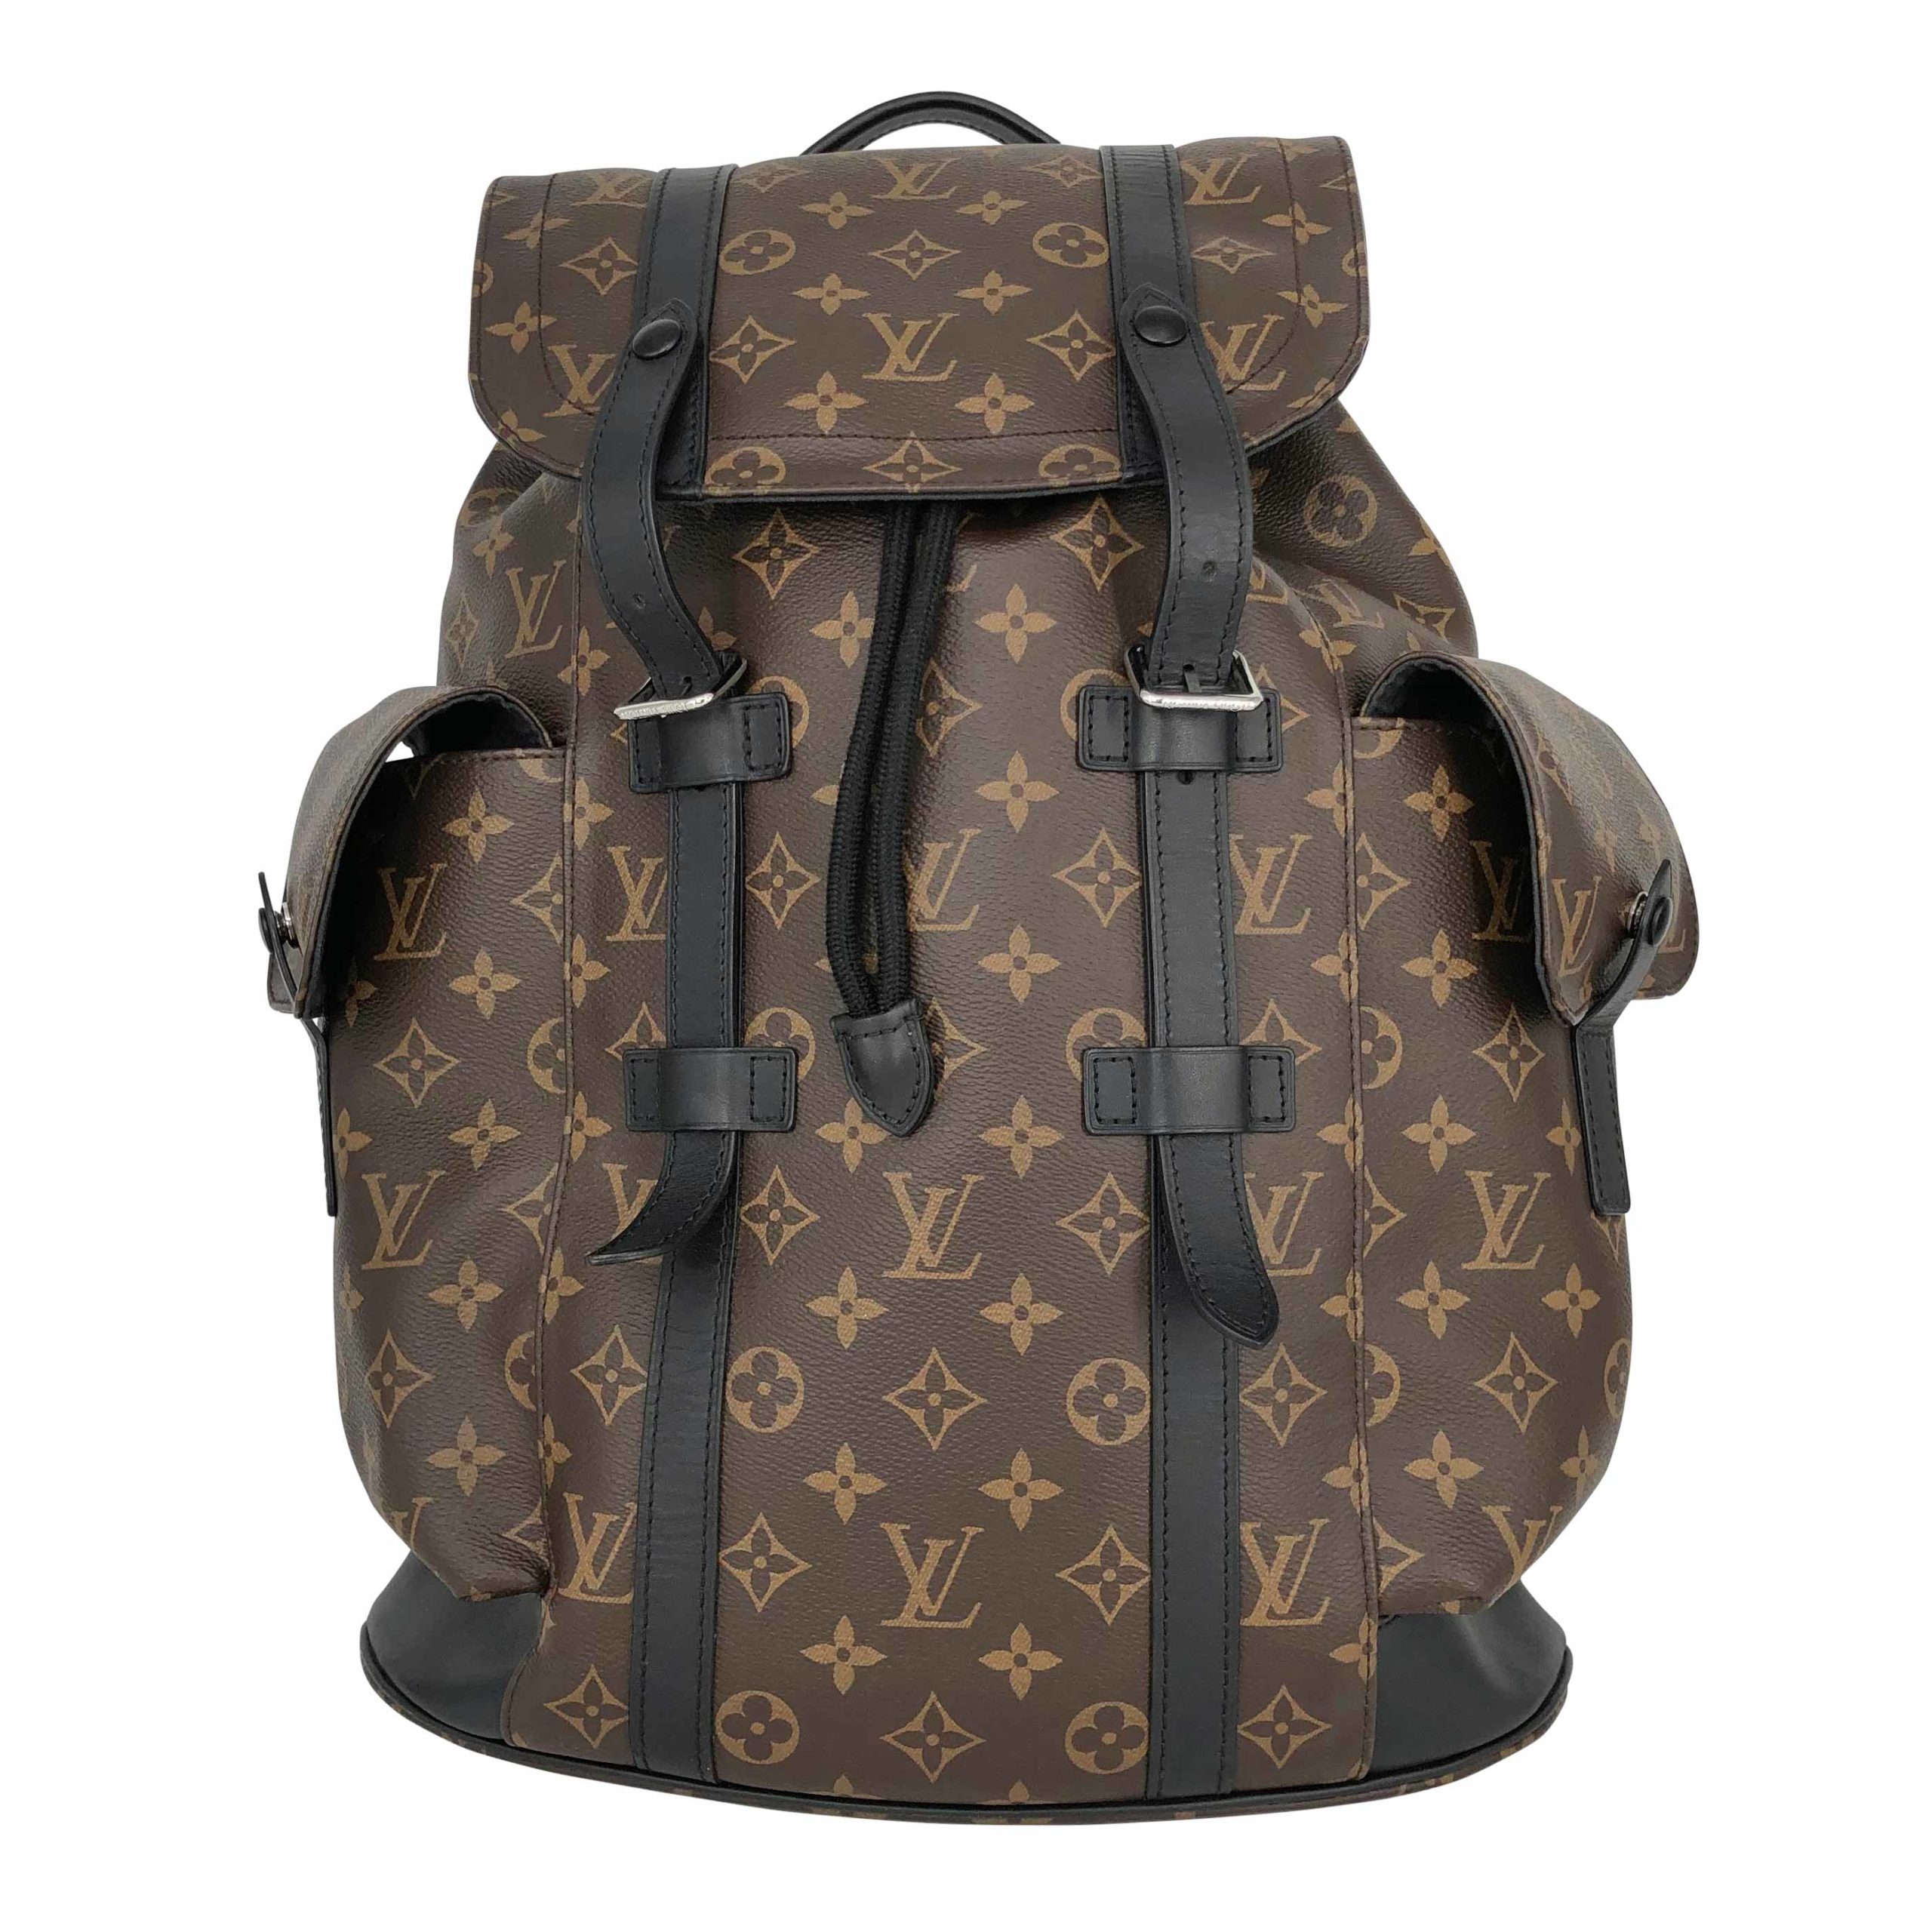 RARE AUTHENTIC Louis Vuitton Christopher Backpack Monogram RUNWAY